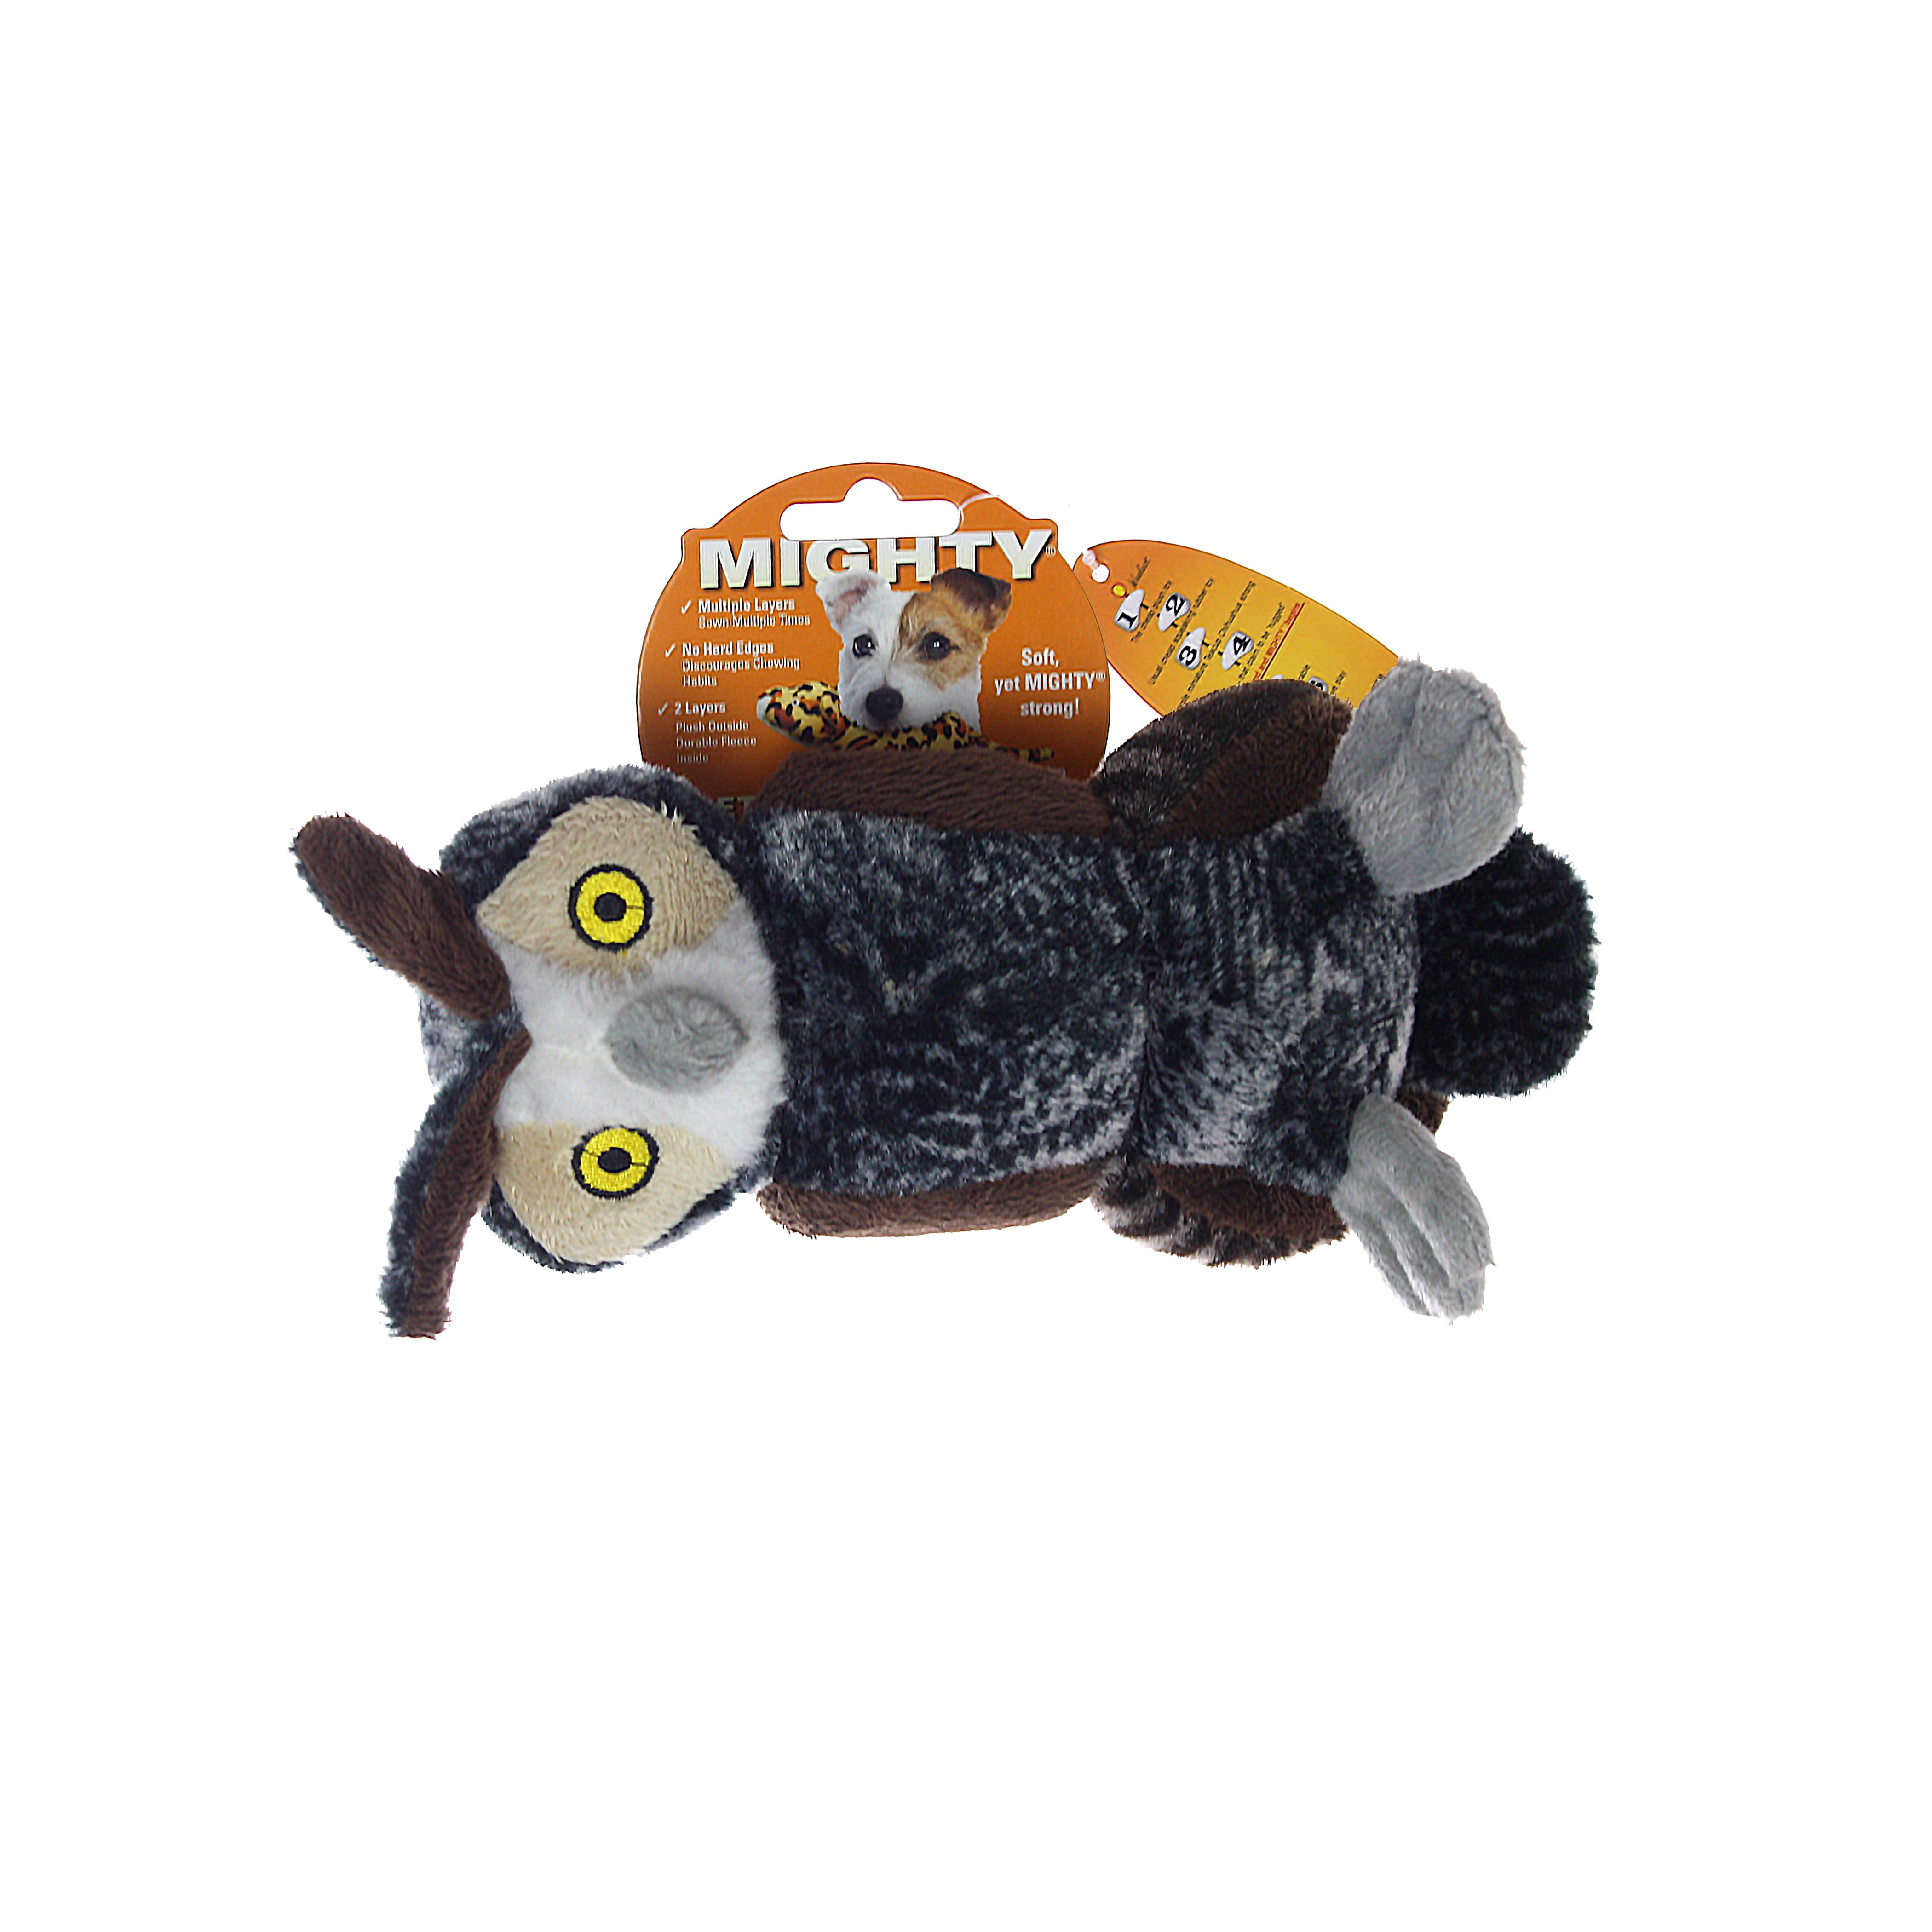 Mighty Junior Nature Owl, Plush and Durable Dog Toy - Walmart.com